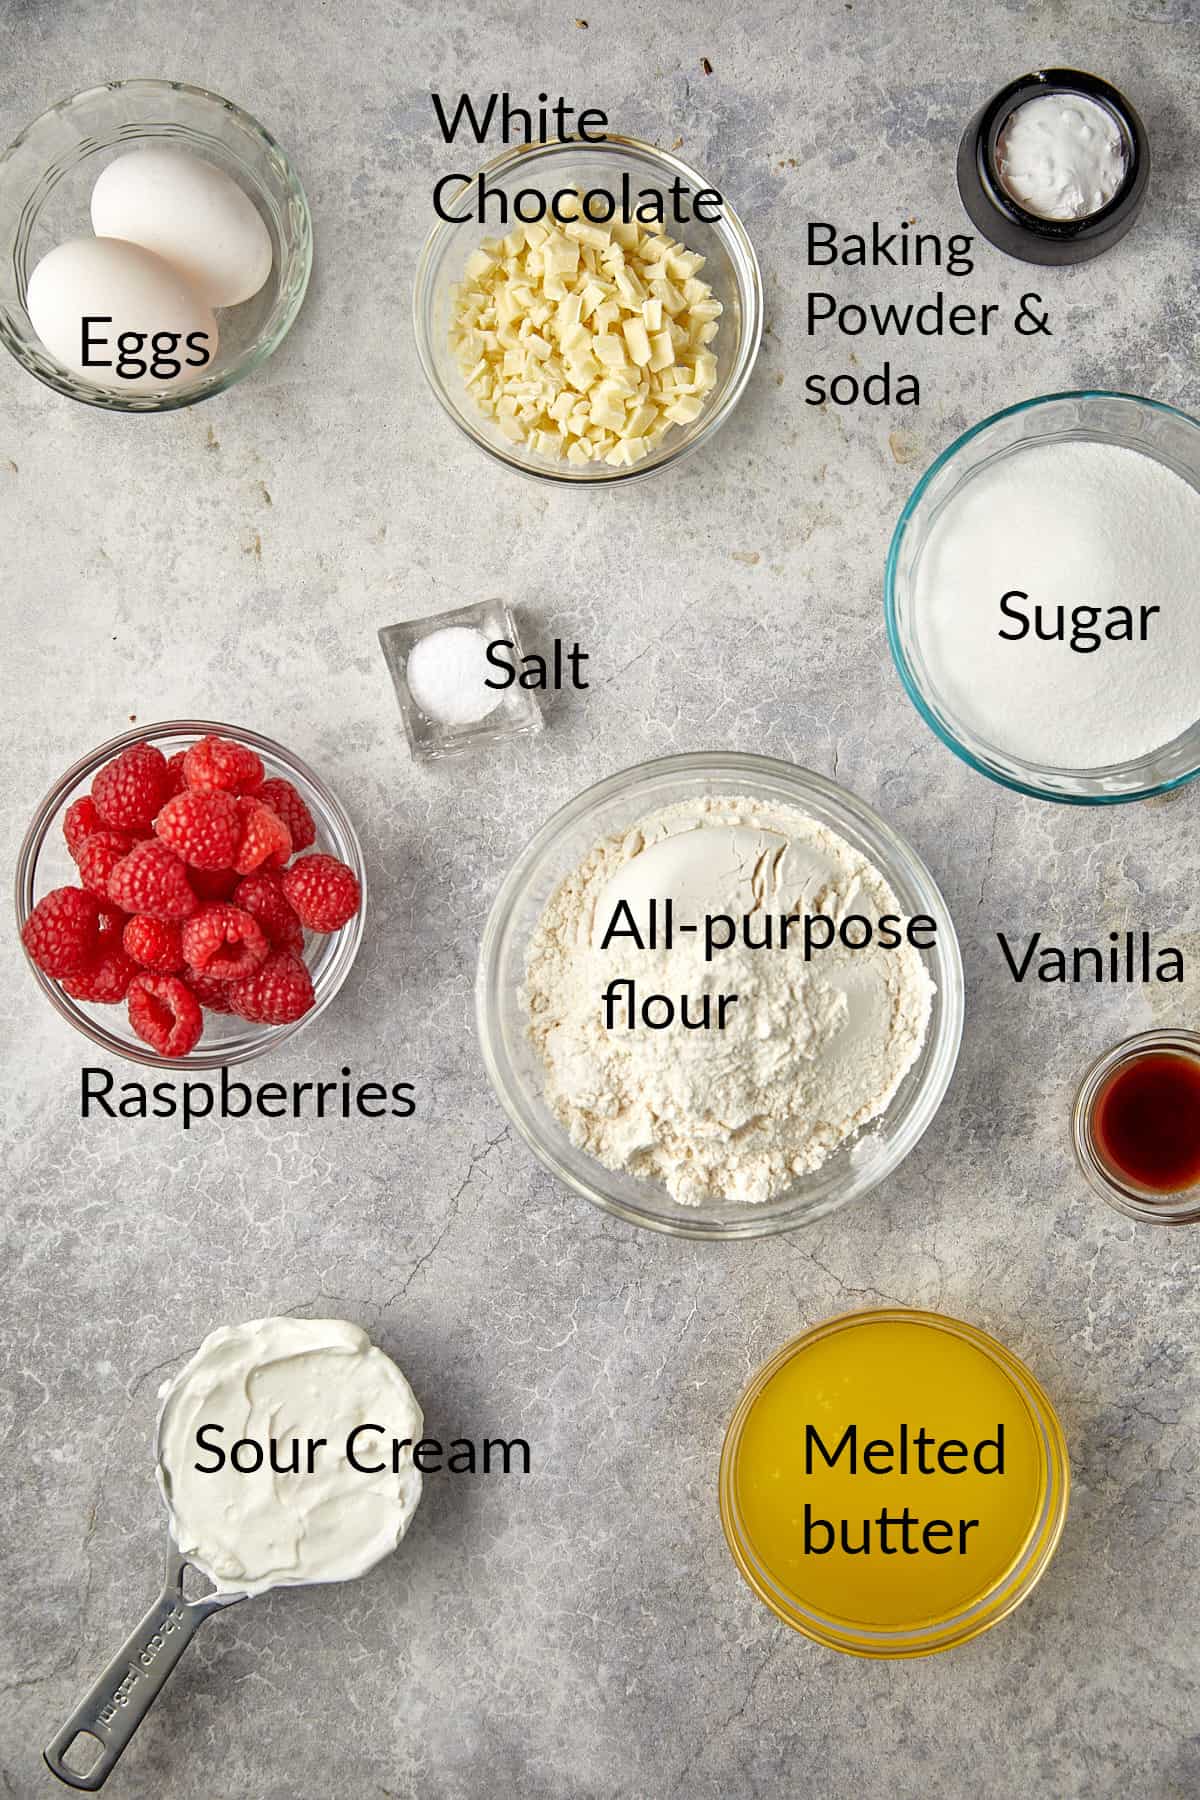 The image shows a collection of ingredients laid out on a gray surface, each labeled with its name. There are two eggs, a bowl of chopped white chocolate, a small container with baking powder and baking soda, a bowl of sugar, a pinch of salt, a bowl of fresh raspberries, a bowl of all-purpose flour, a small container of vanilla extract, a measuring cup with sour cream, and a bowl of melted butter. 